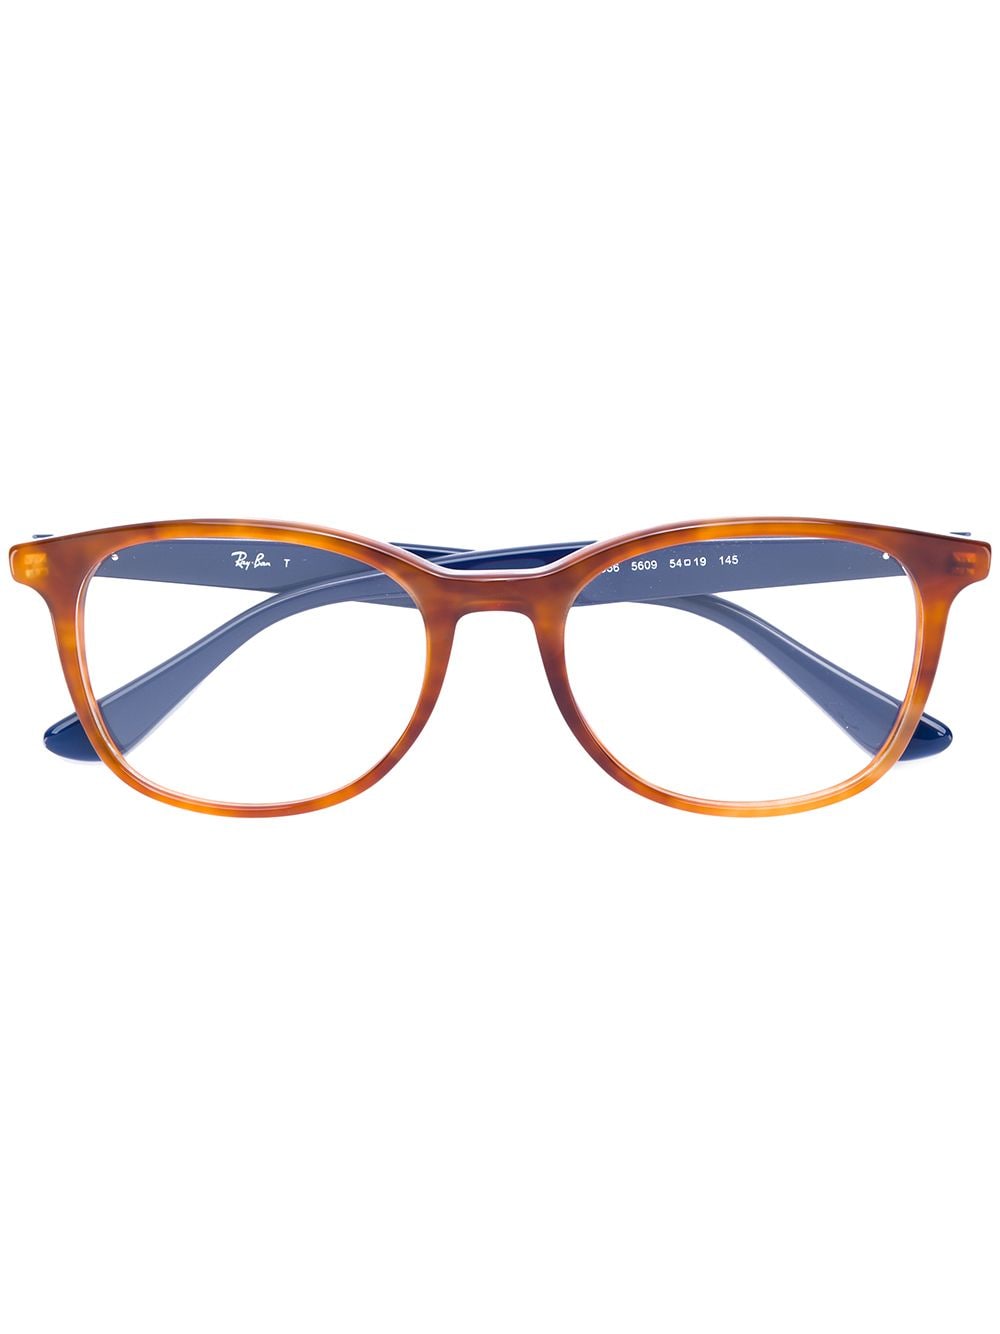 RAY BAN TWO-TONE SQUARED GLASSES,RB535612322694